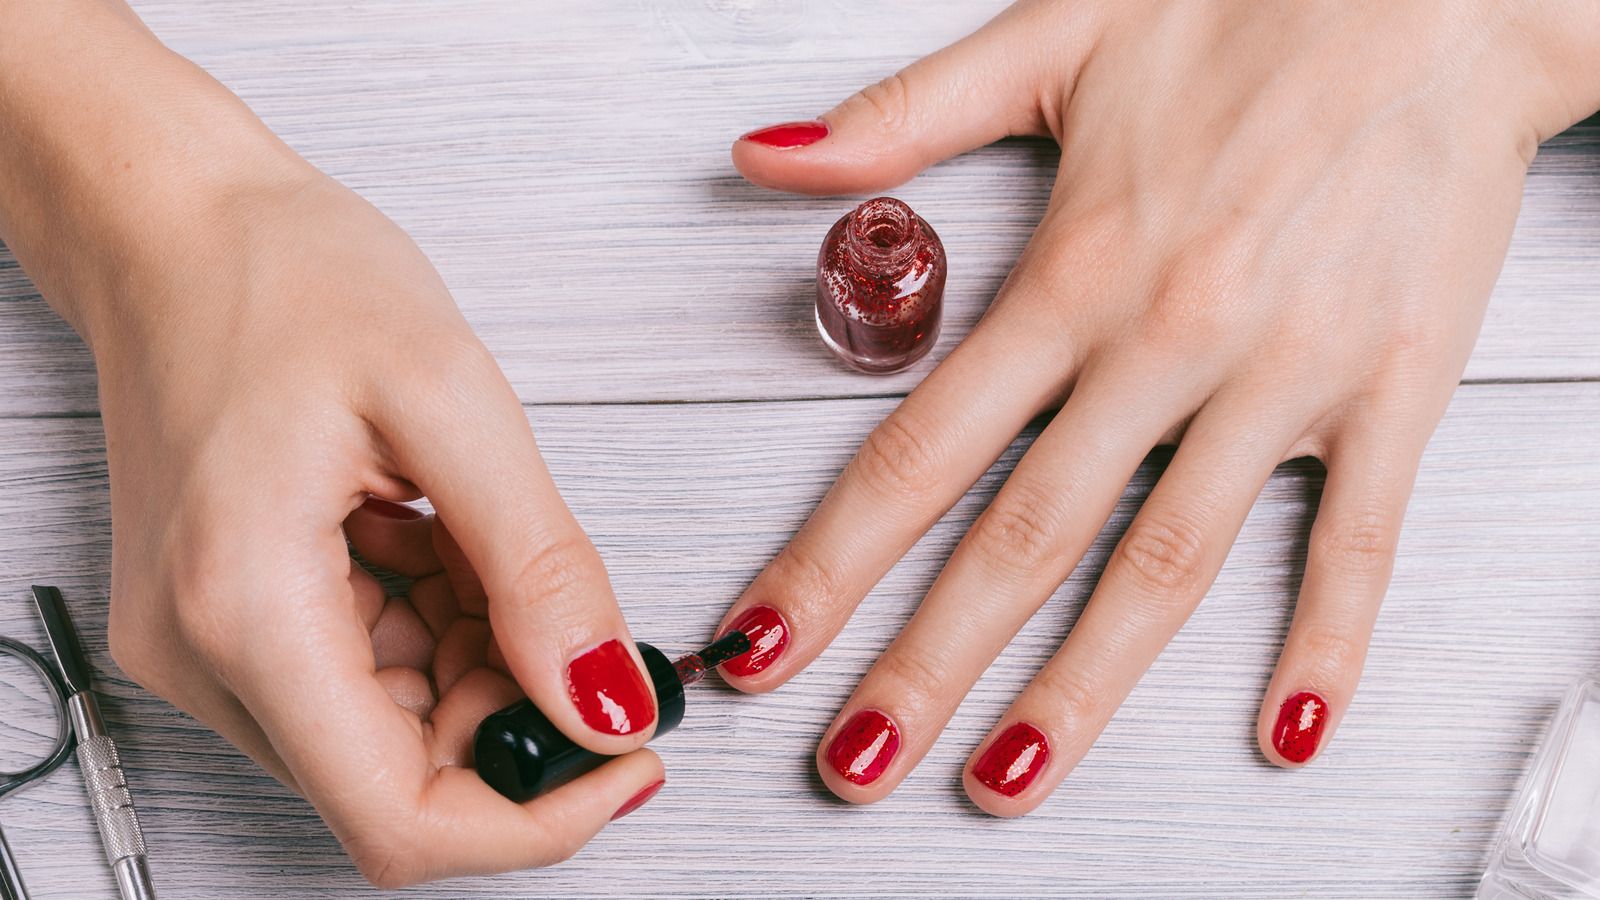 4. "Top Nail Colors for a Perfect Fall Look" - wide 3